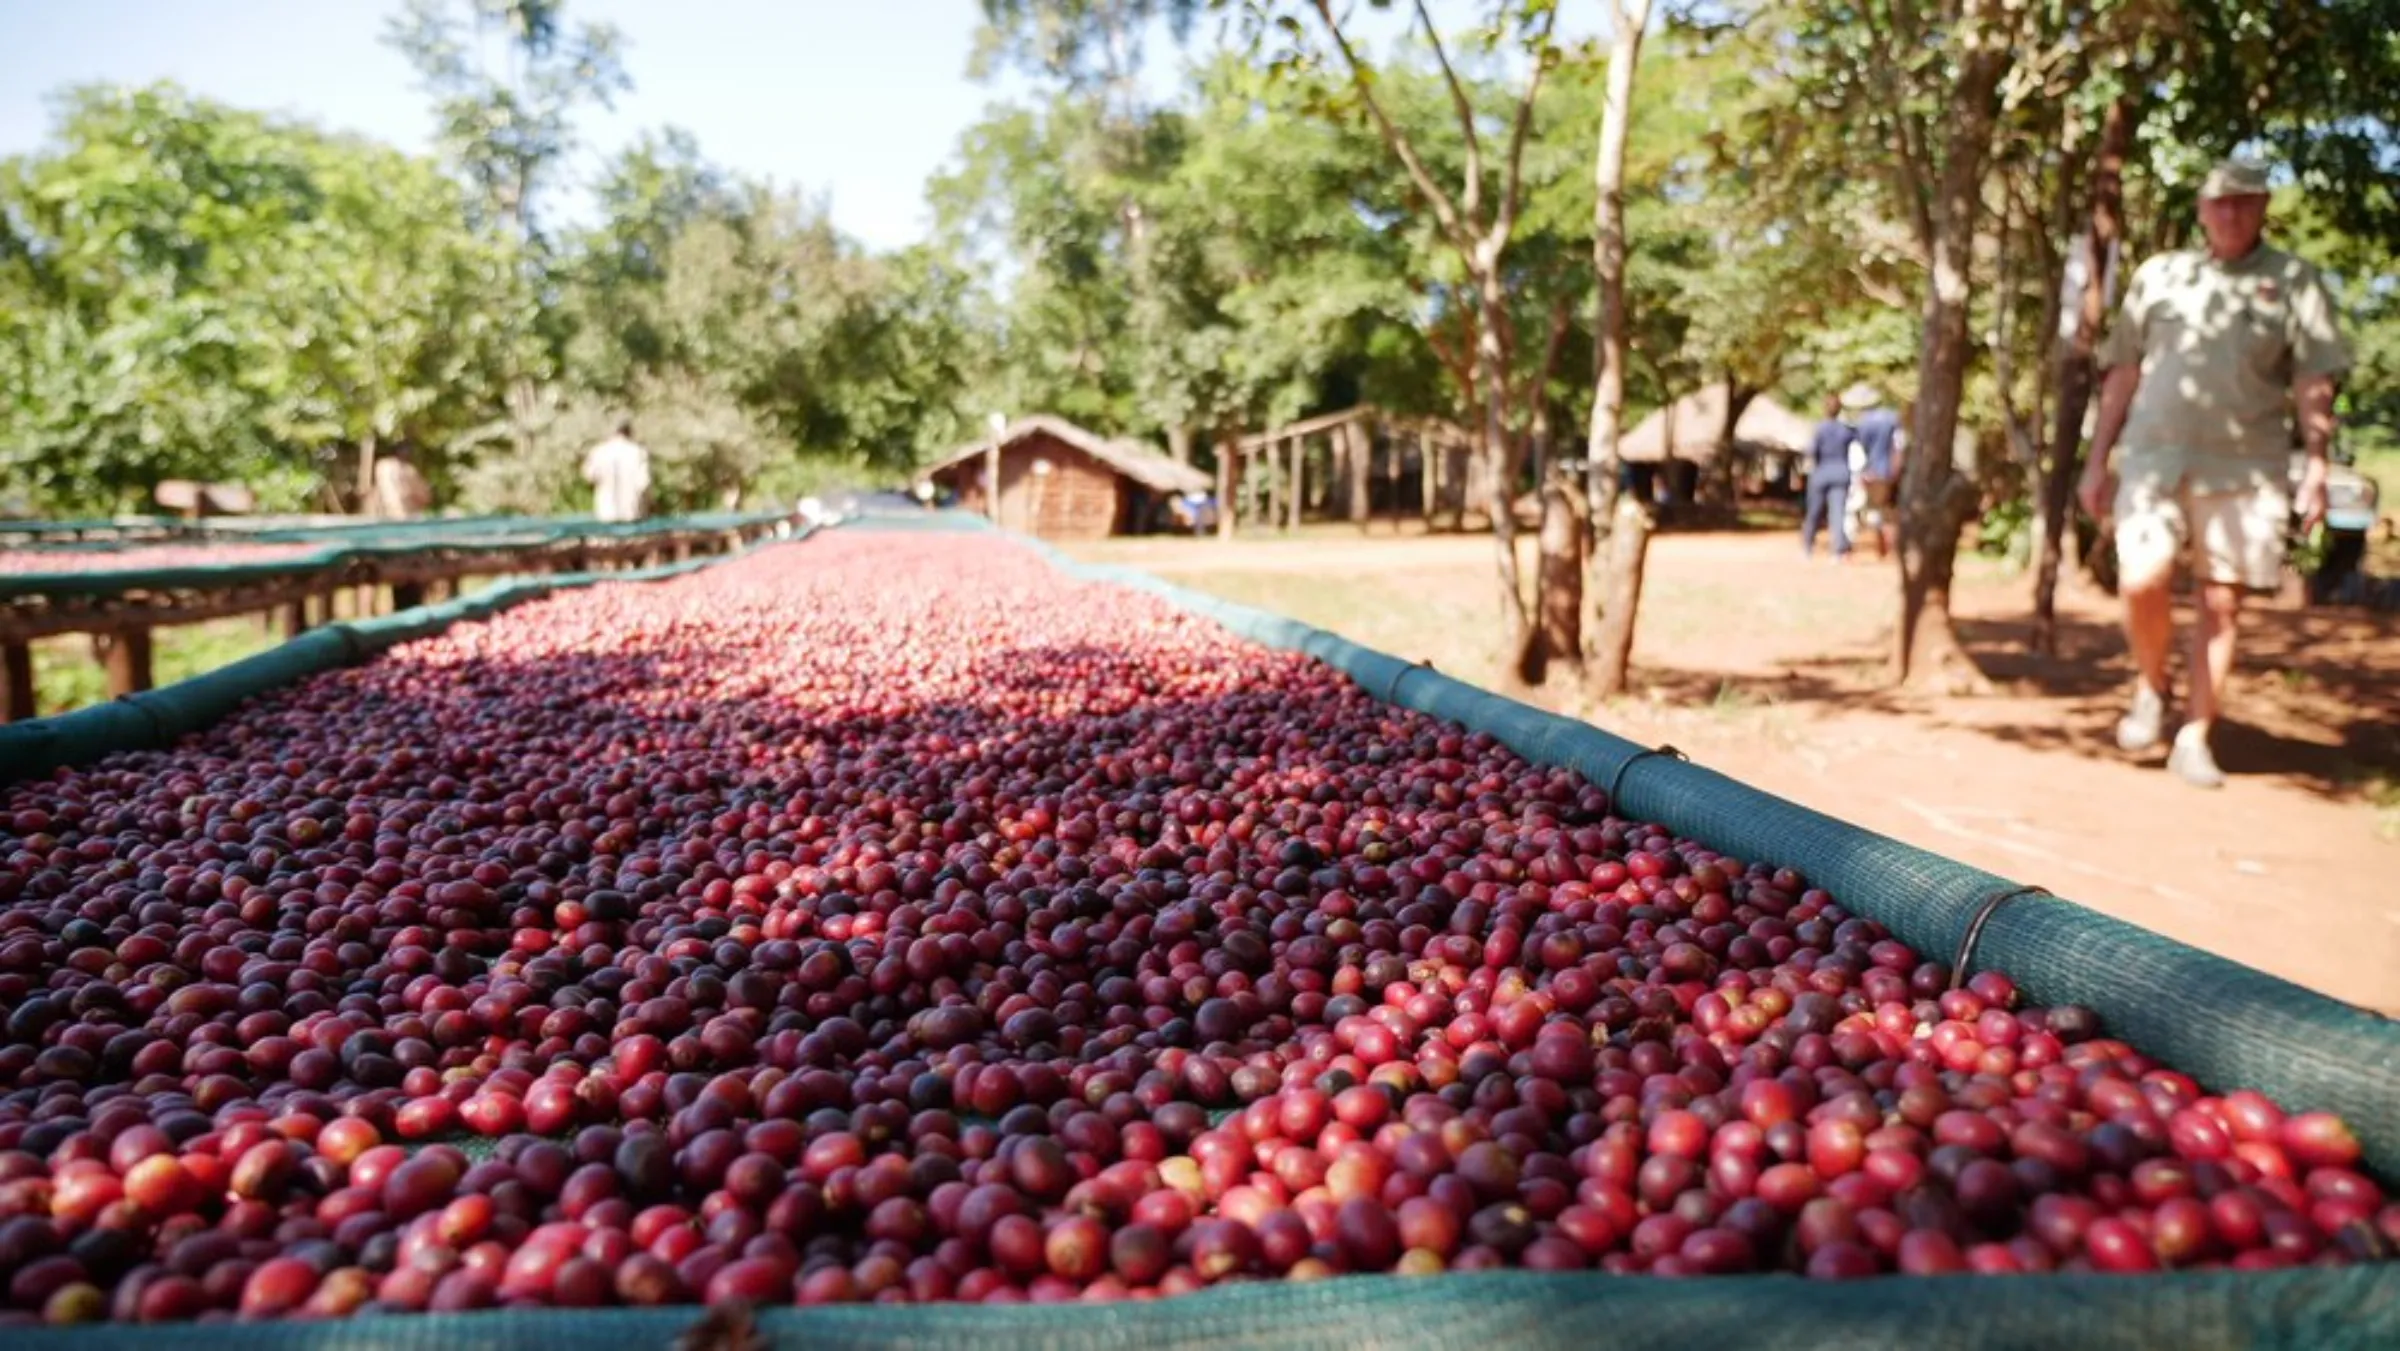 Freshly-picked coffee beans dry in the sun on Mount Gorongosa in Mozambique, May 26, 2022